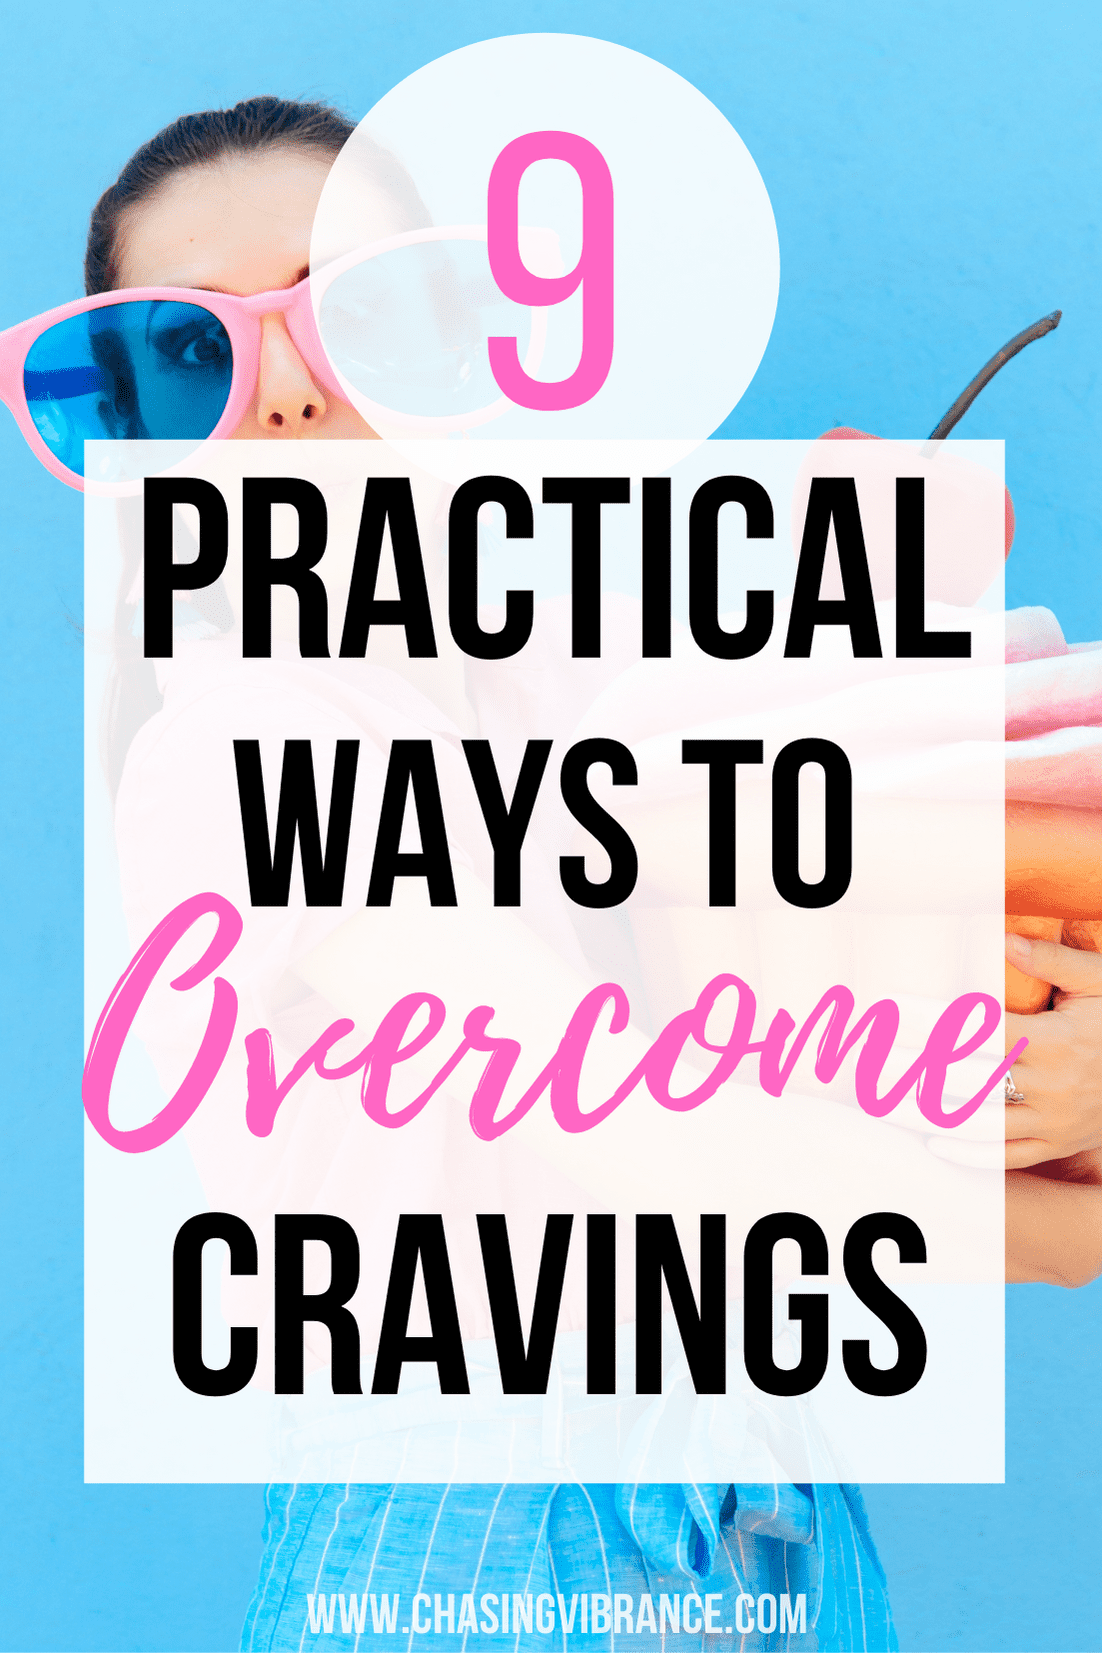 9 Practical Ways to Overcome Cravings